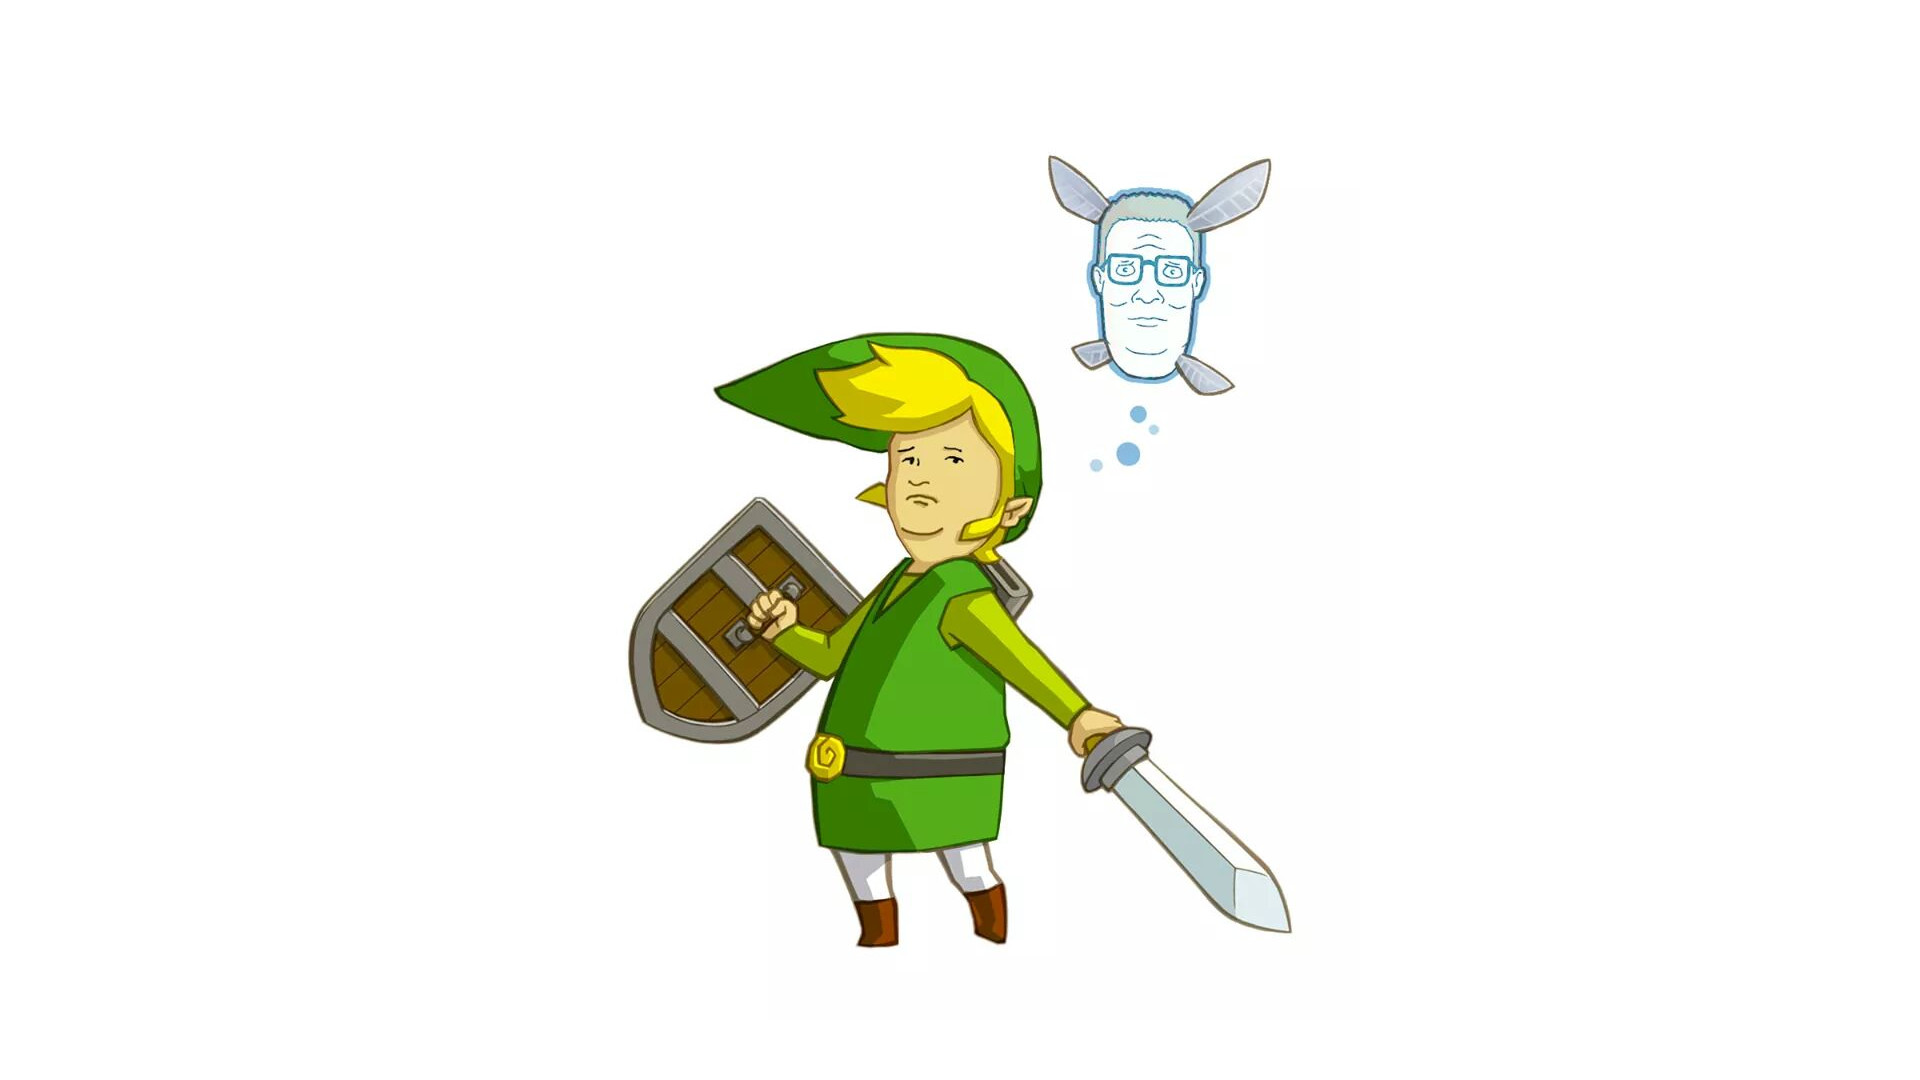 General crossover humor King of the Hill The Legend of Zelda